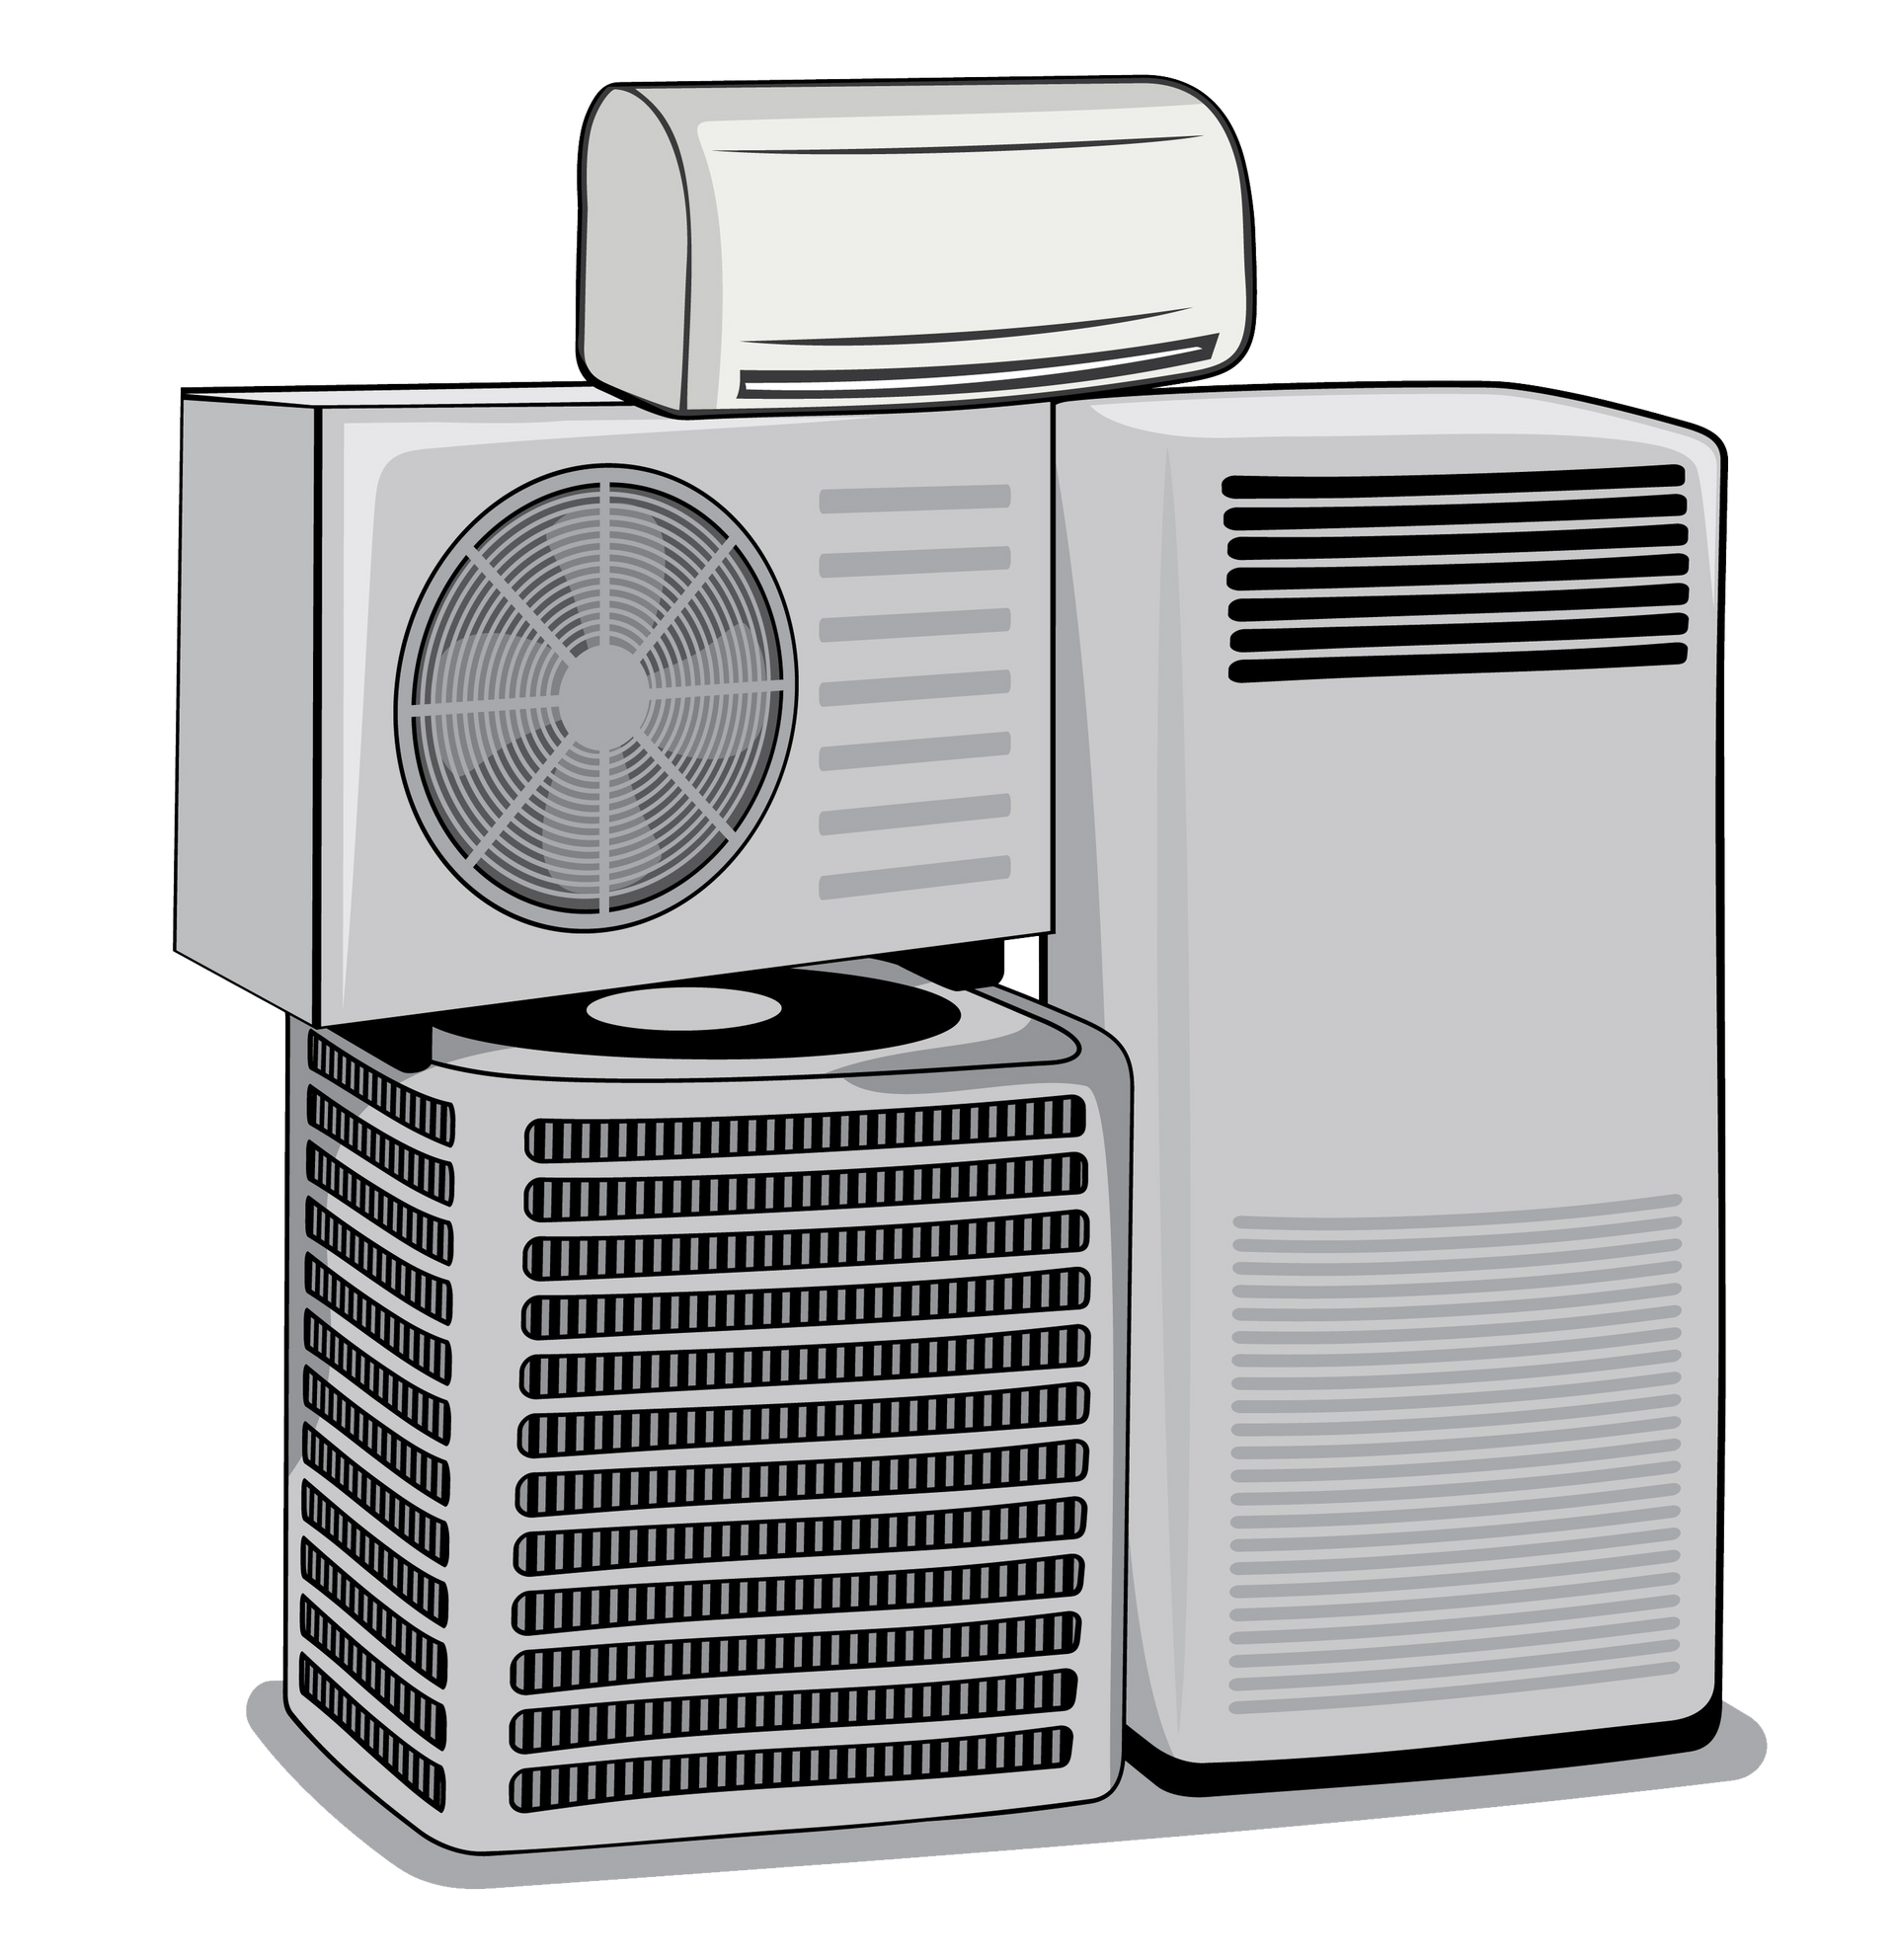 Air Conditioner devices